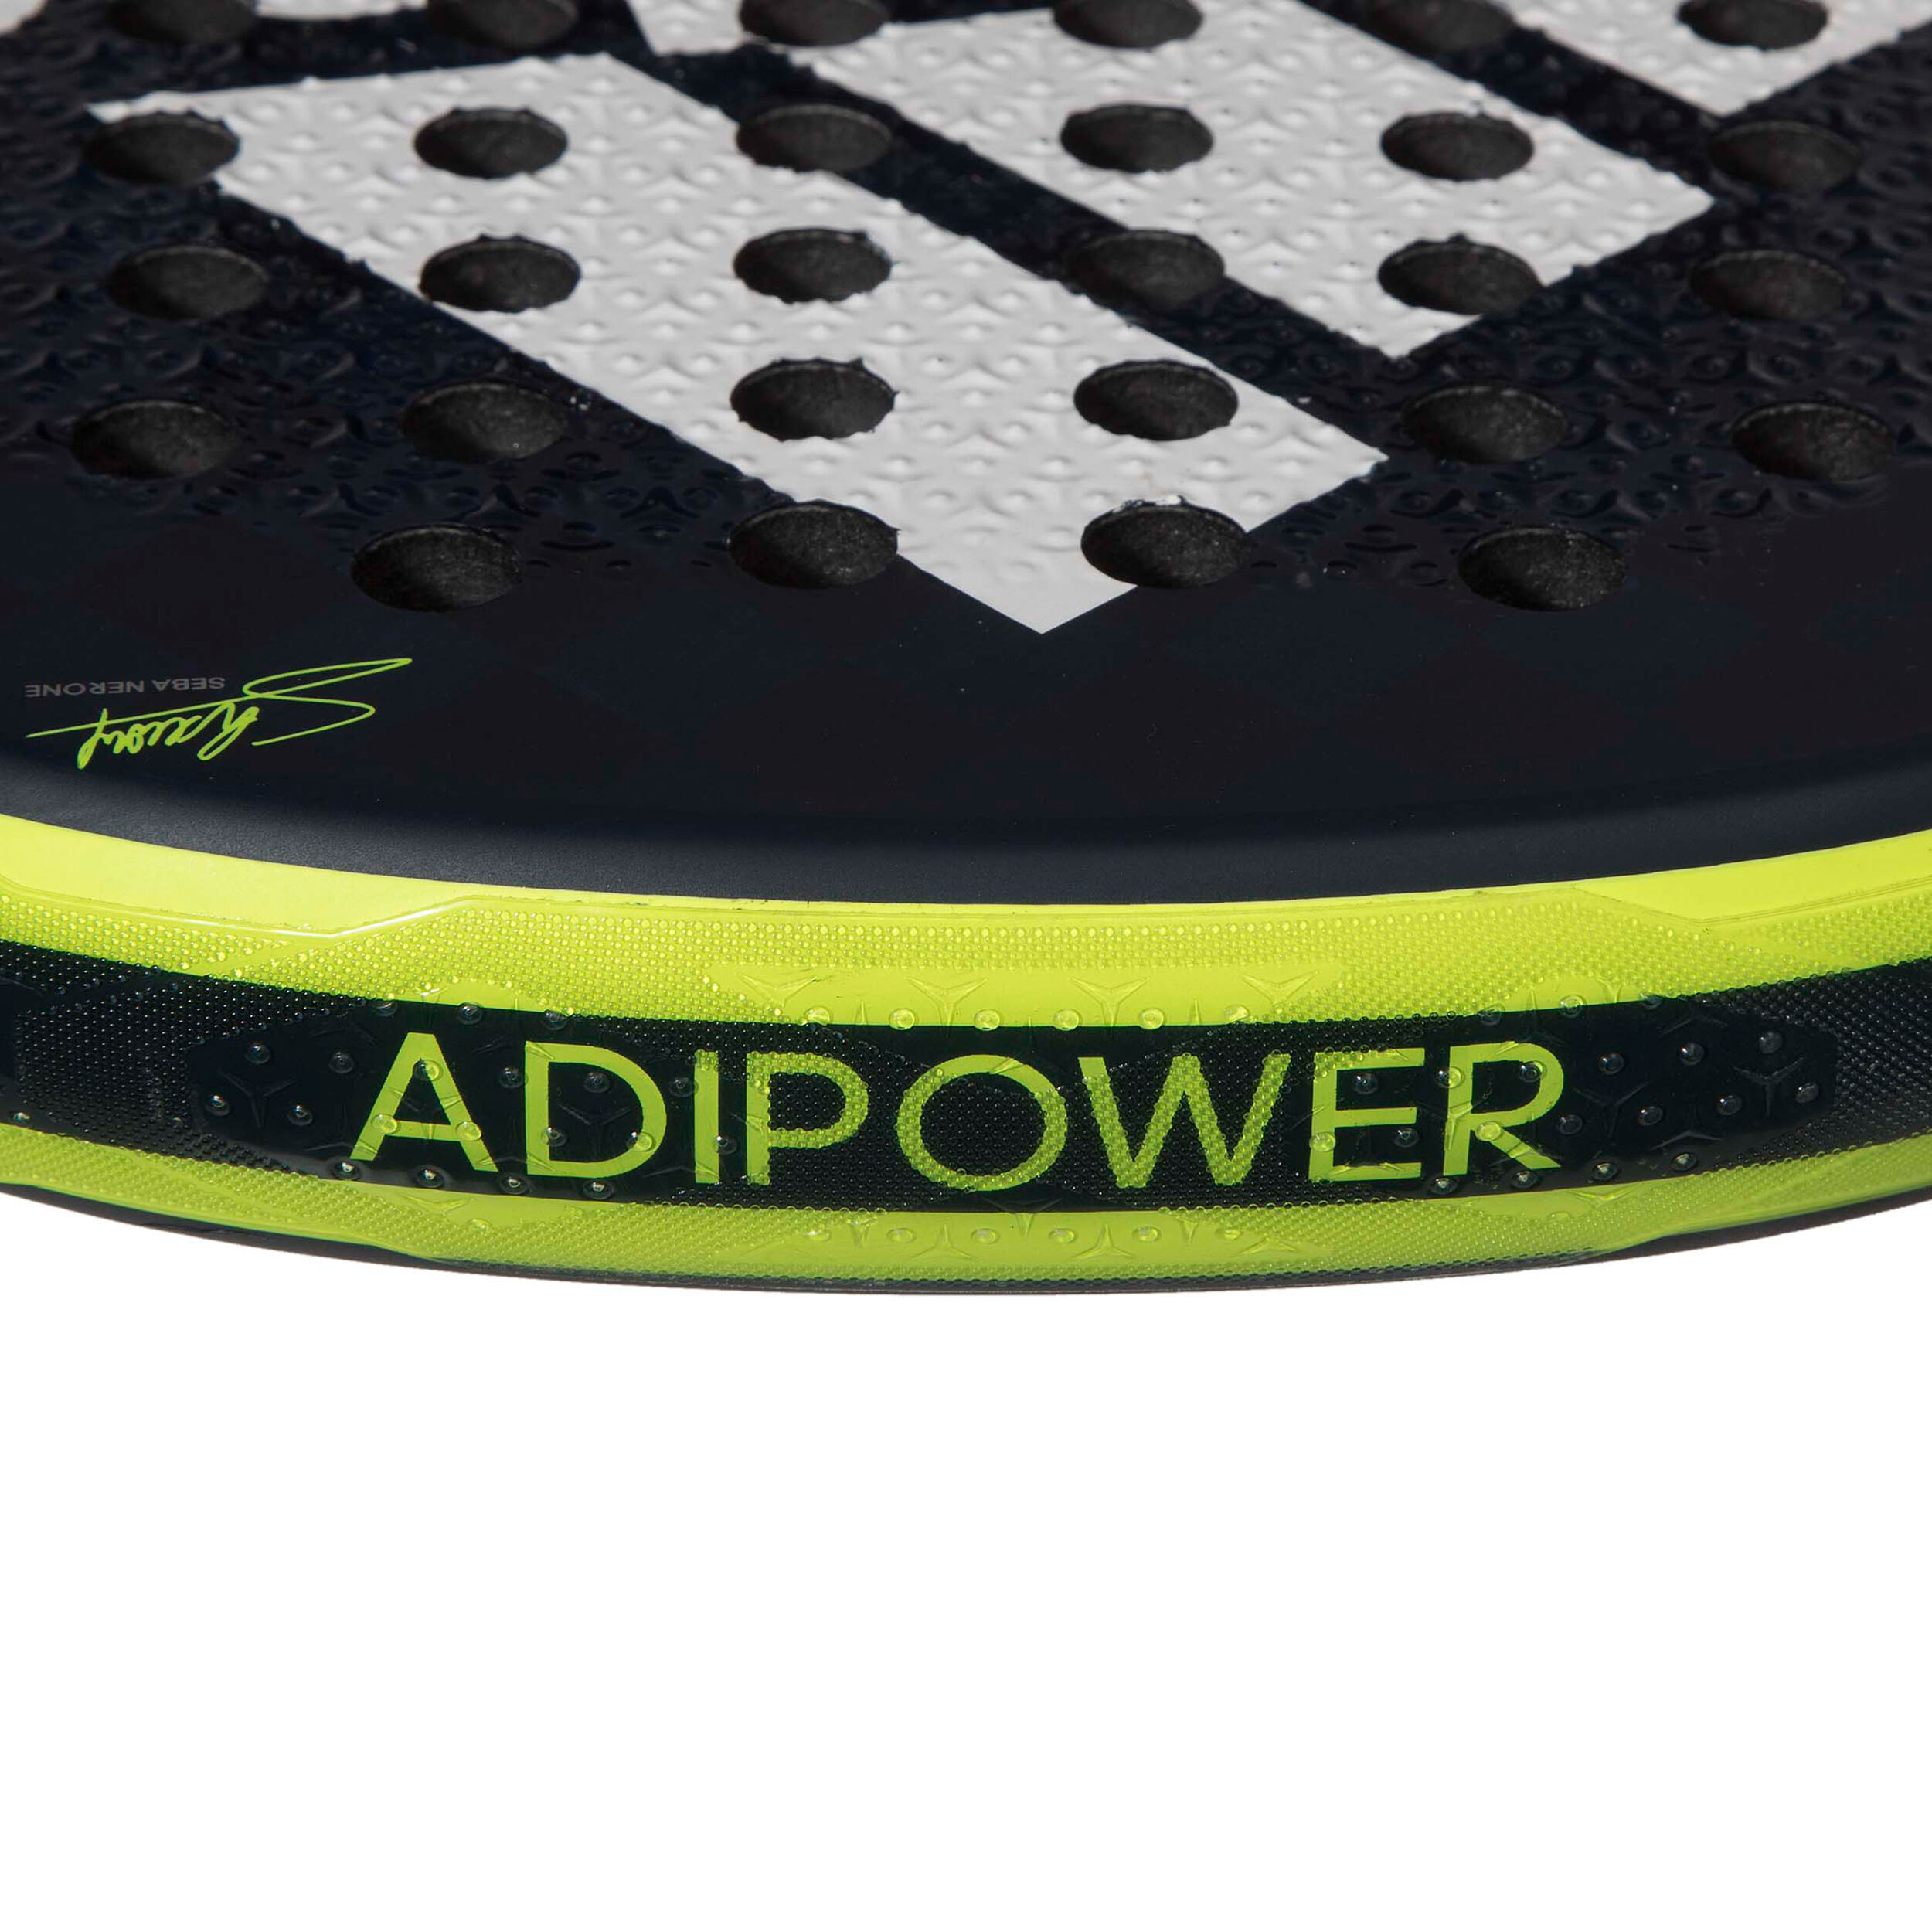 adidas Adipower III Women's Weightlifting Shoes | SportsShoes.com